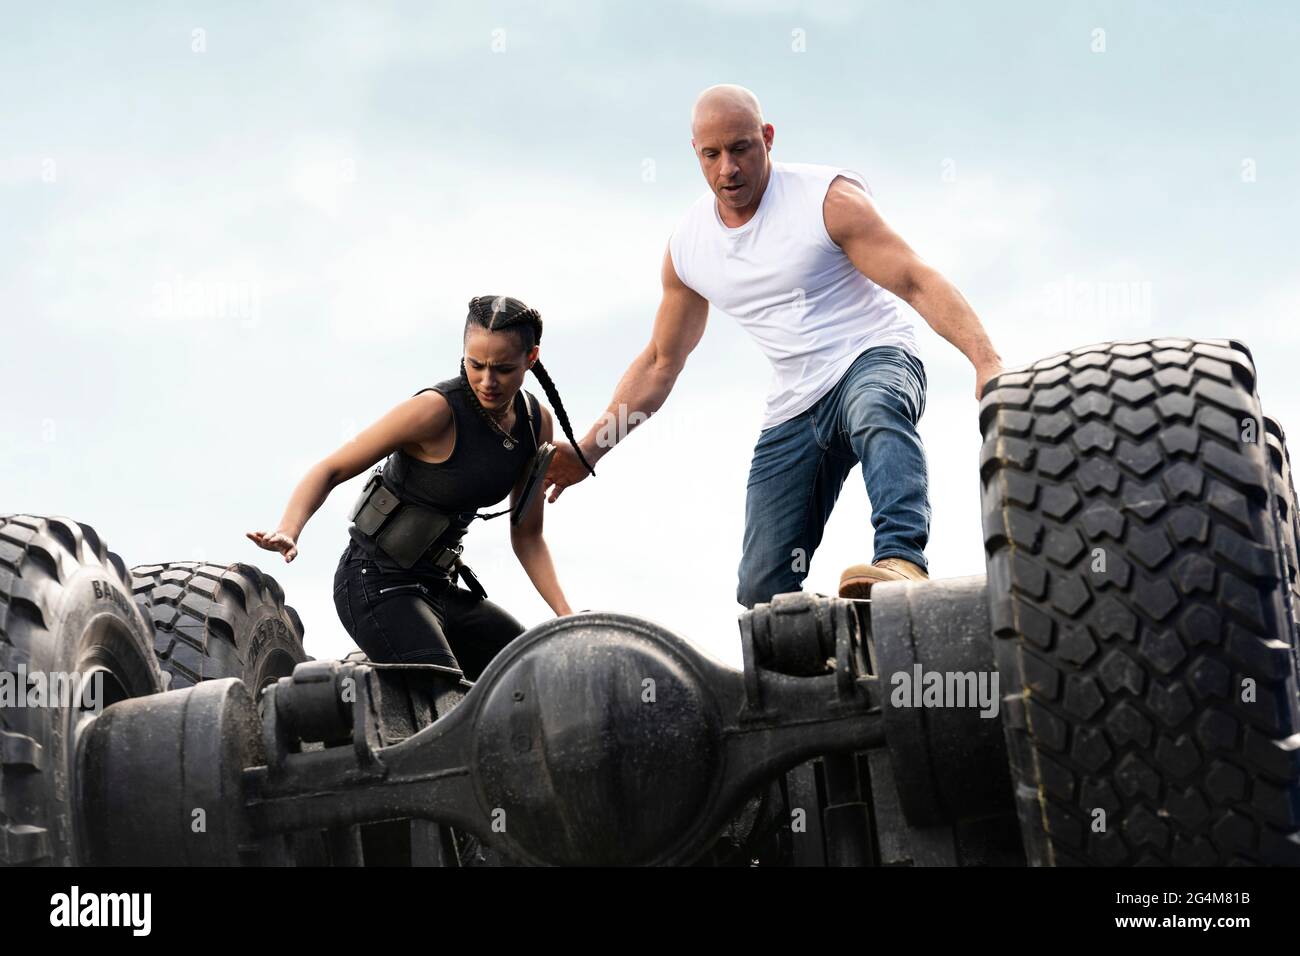 Fast & Furious 9 (2020) directed by Justin Lin and starring Vin Diesel and Amber Sienna, Michelle Rodriguez, John Cena and Jordana Brewster. Dominic Toretto faces an assassin working with Cipher. Stock Photo